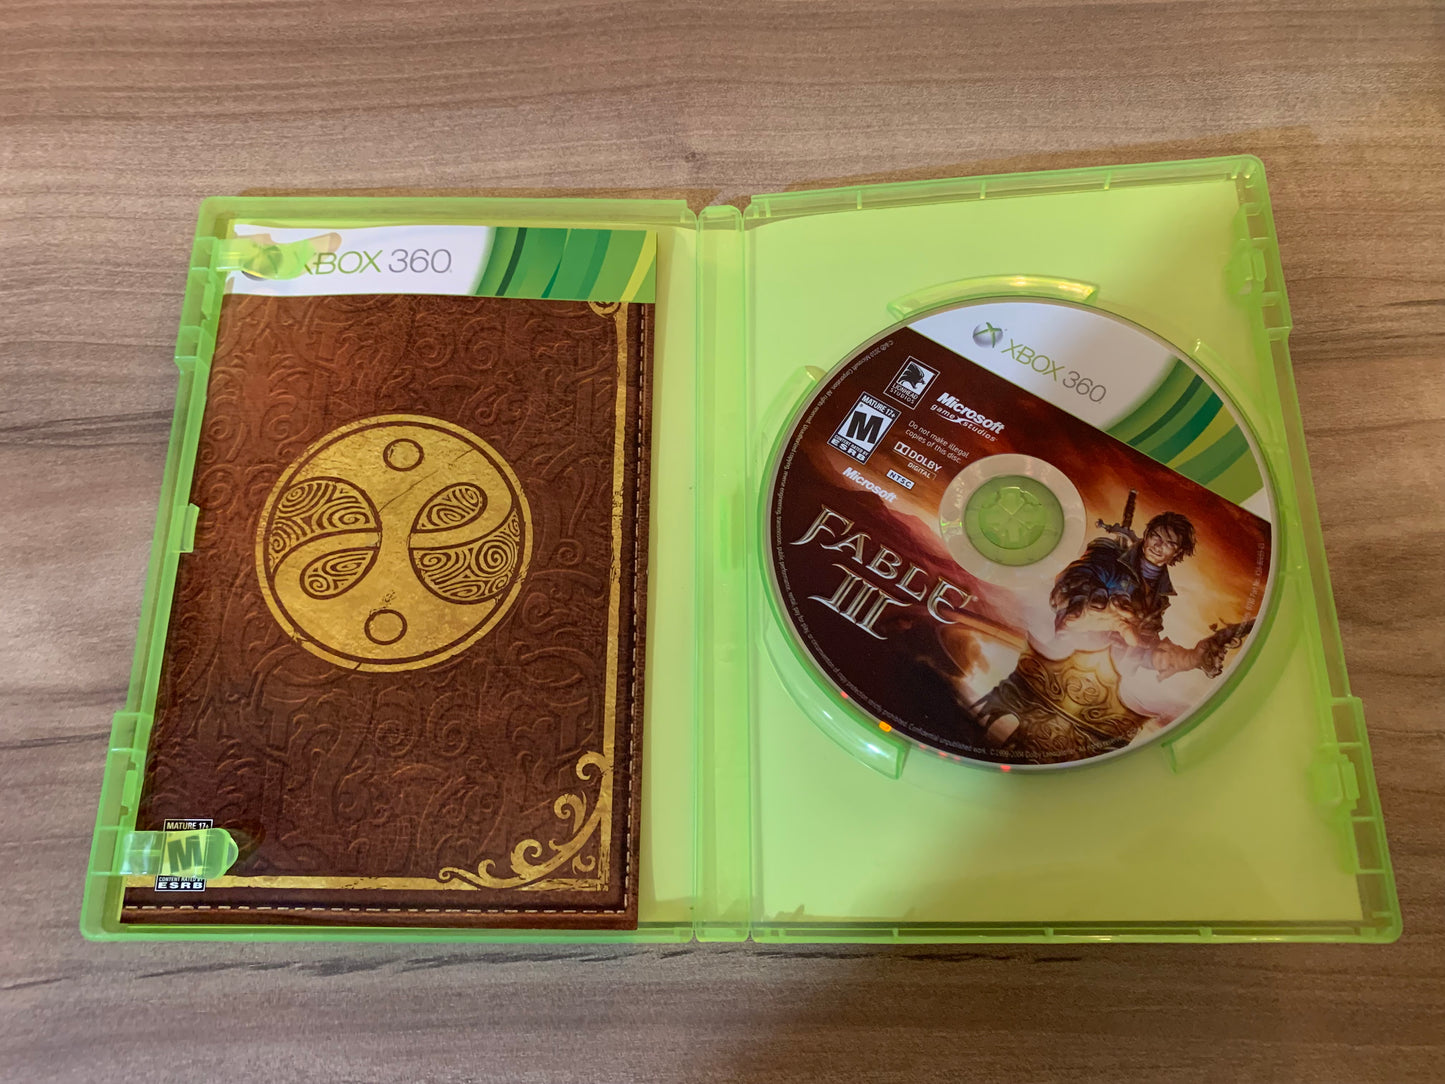 MiCROSOFT XBOX 360 | FABLE III | NOT FOR RESALE